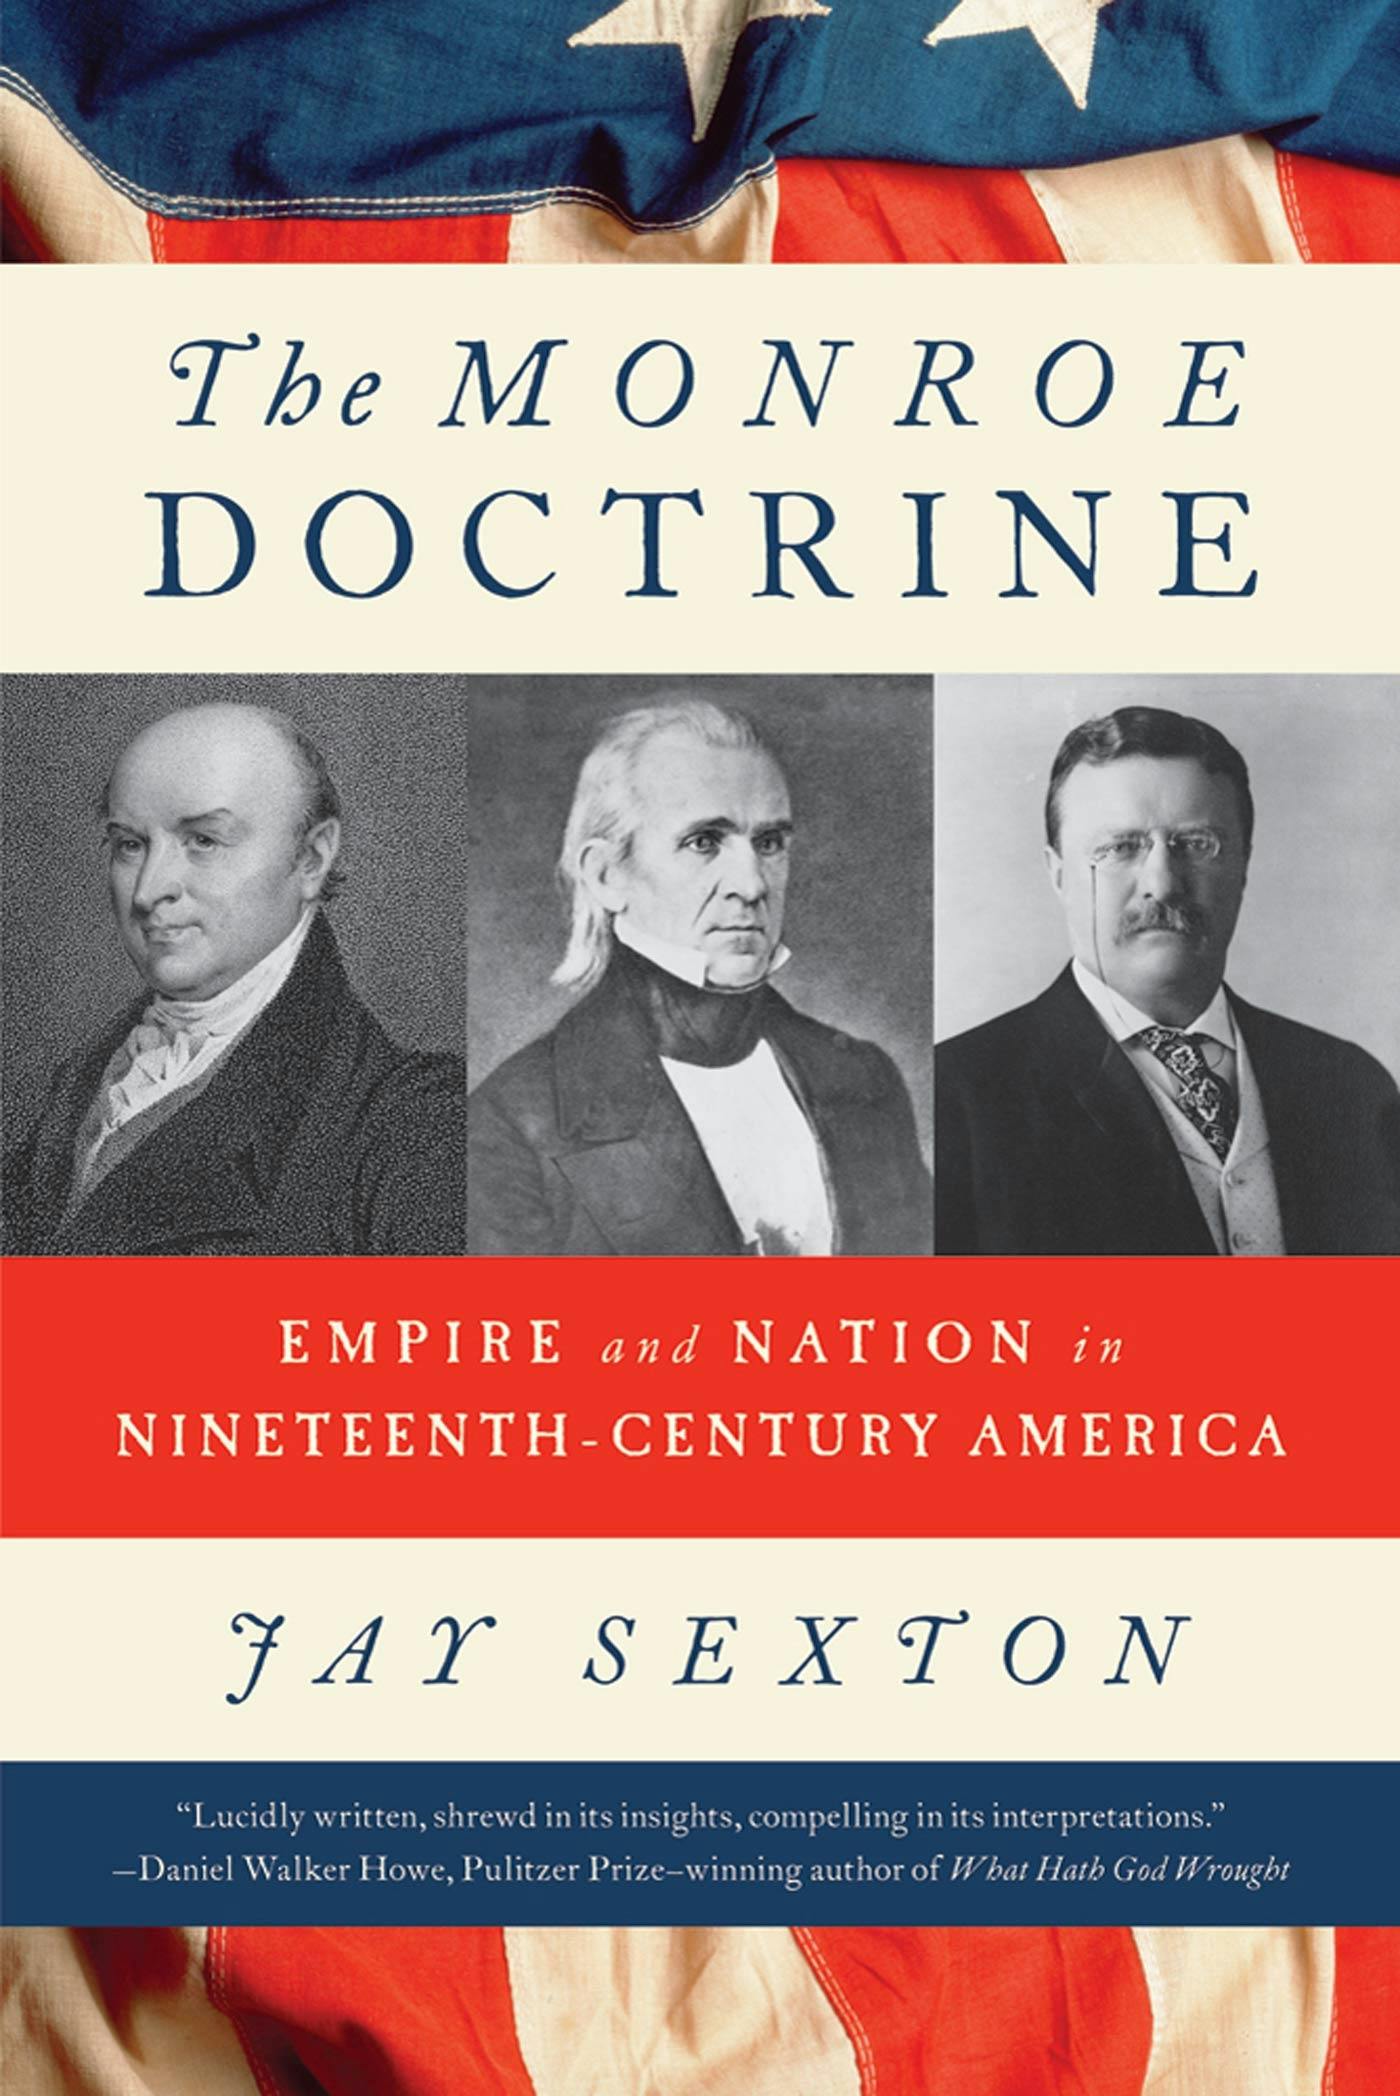 what was the importance of the monroe doctrine